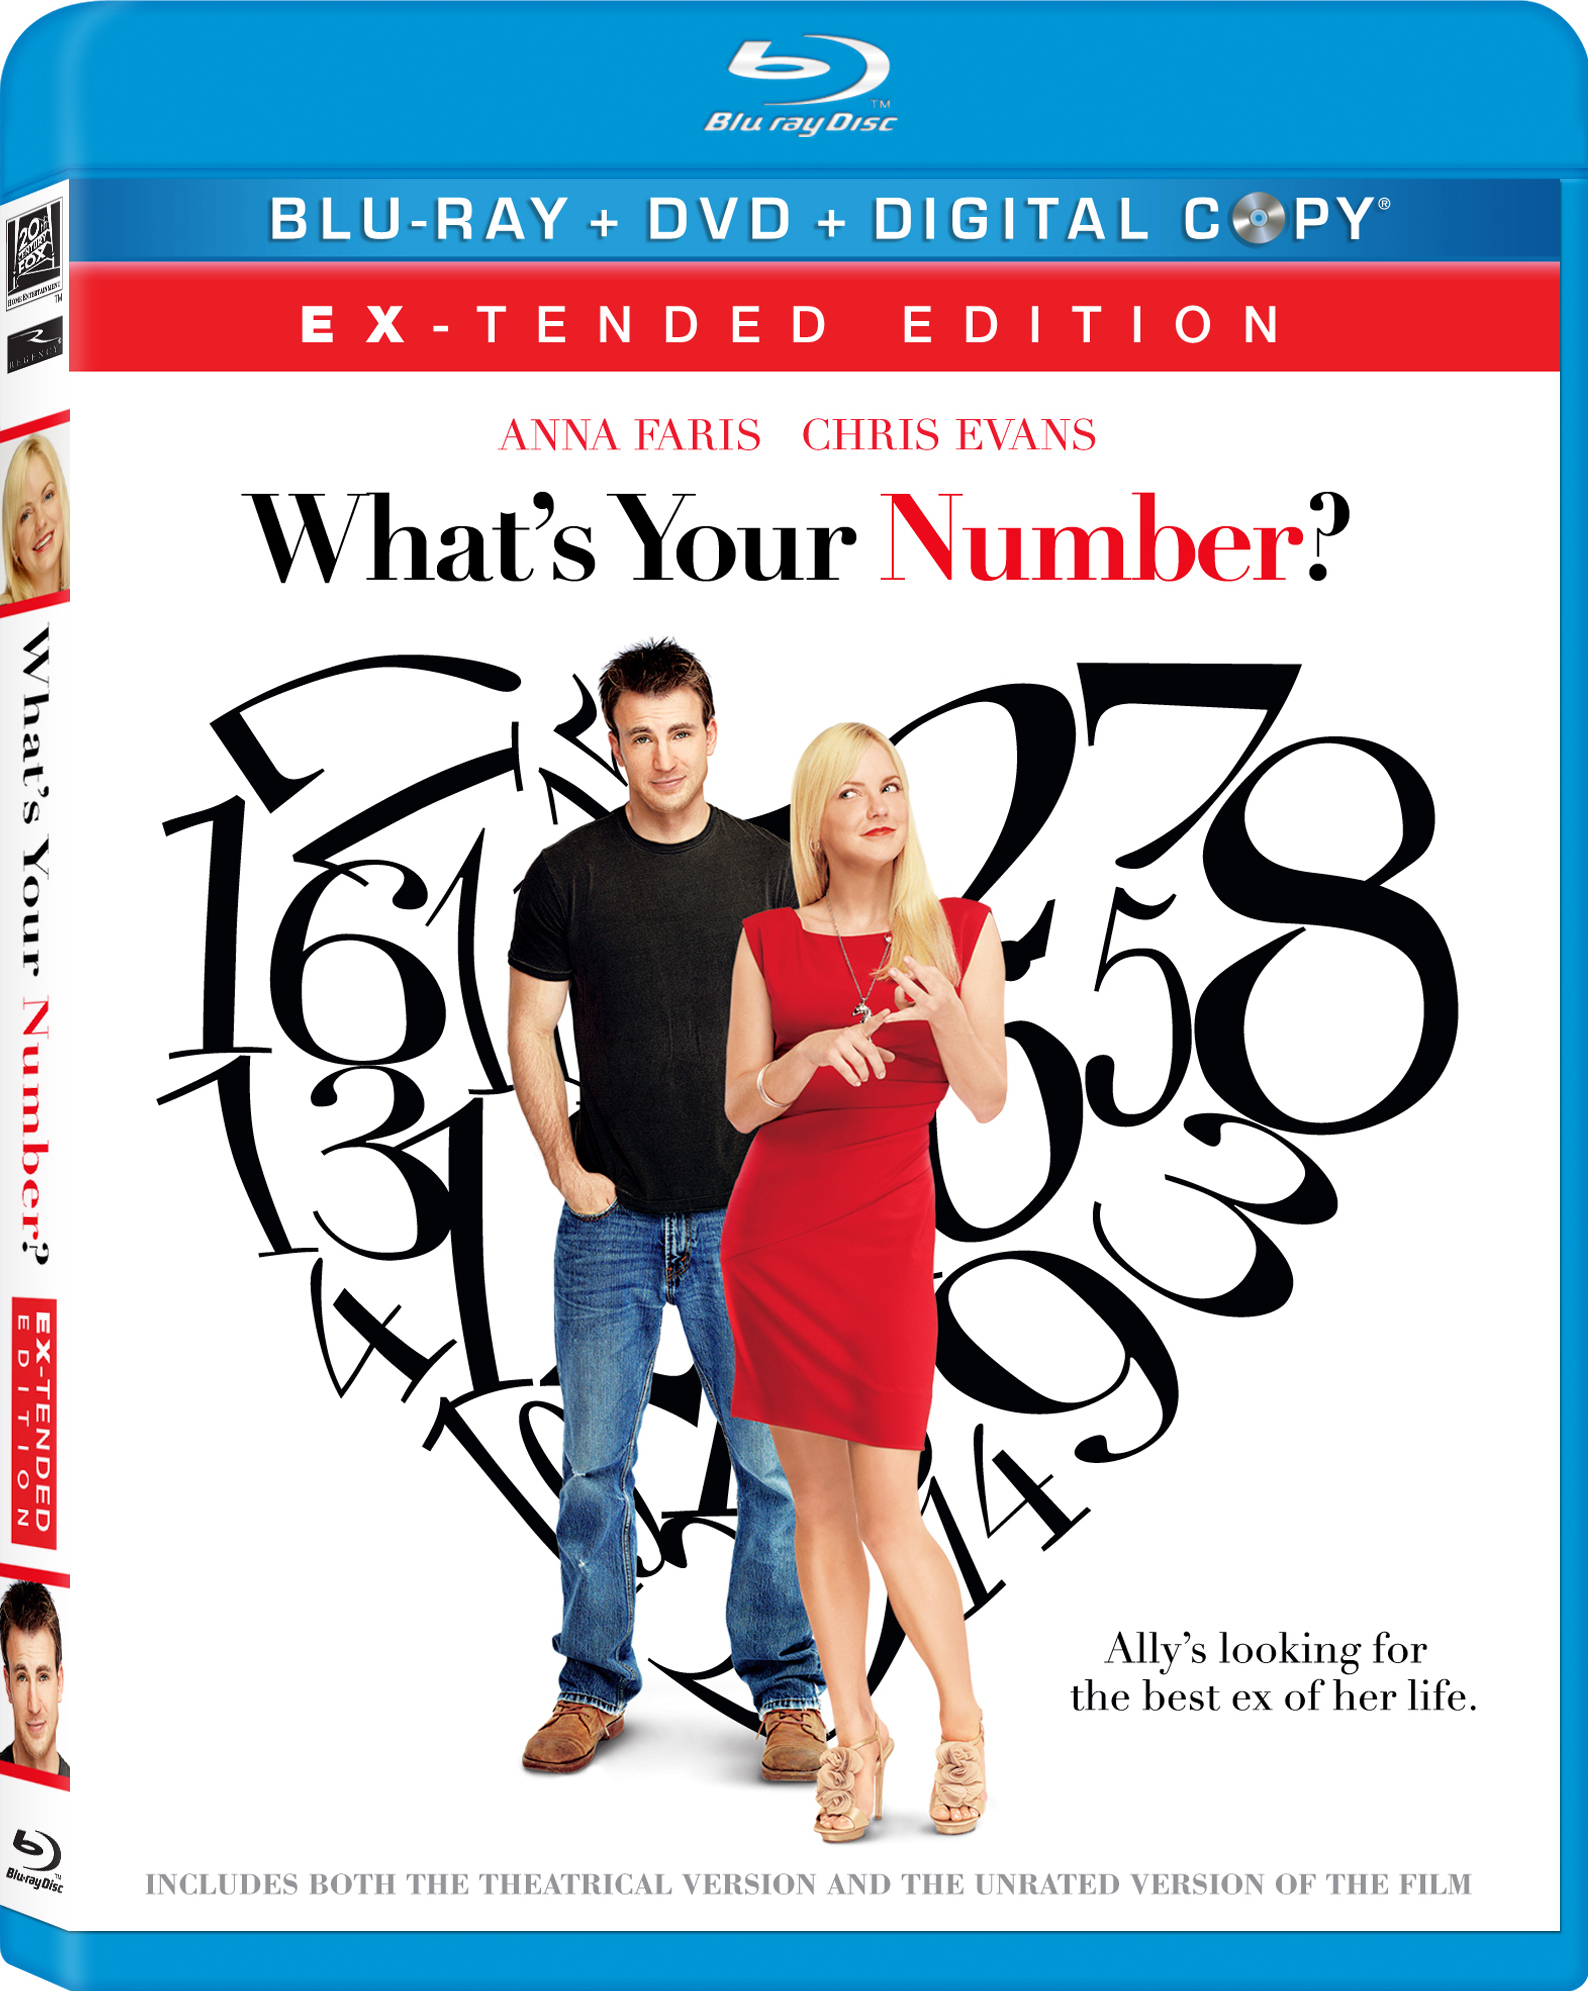 What’s Your Number? Blu-ray/DVD Review